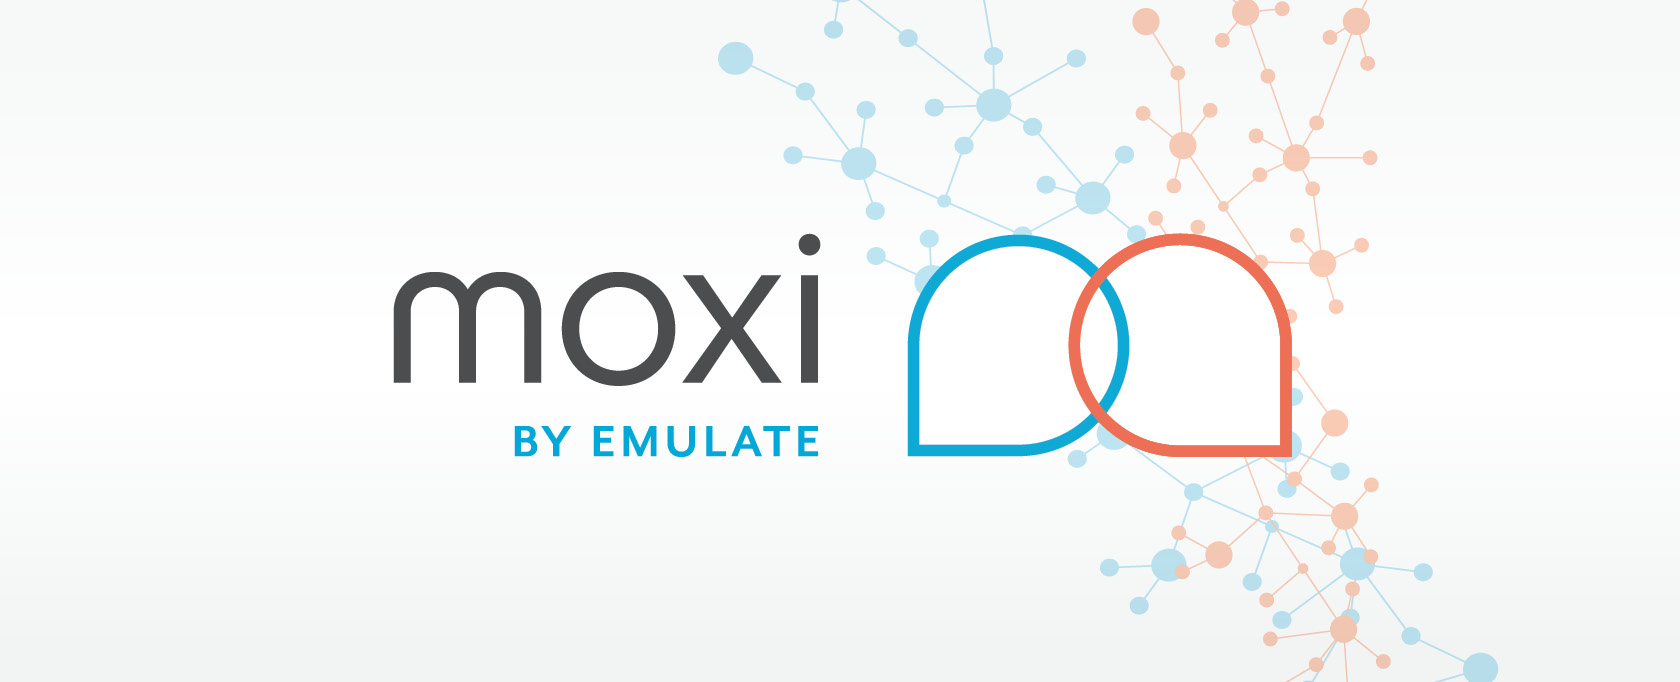 Announcing Moxi: The Social Network for Organ-on-a-Chip Technology